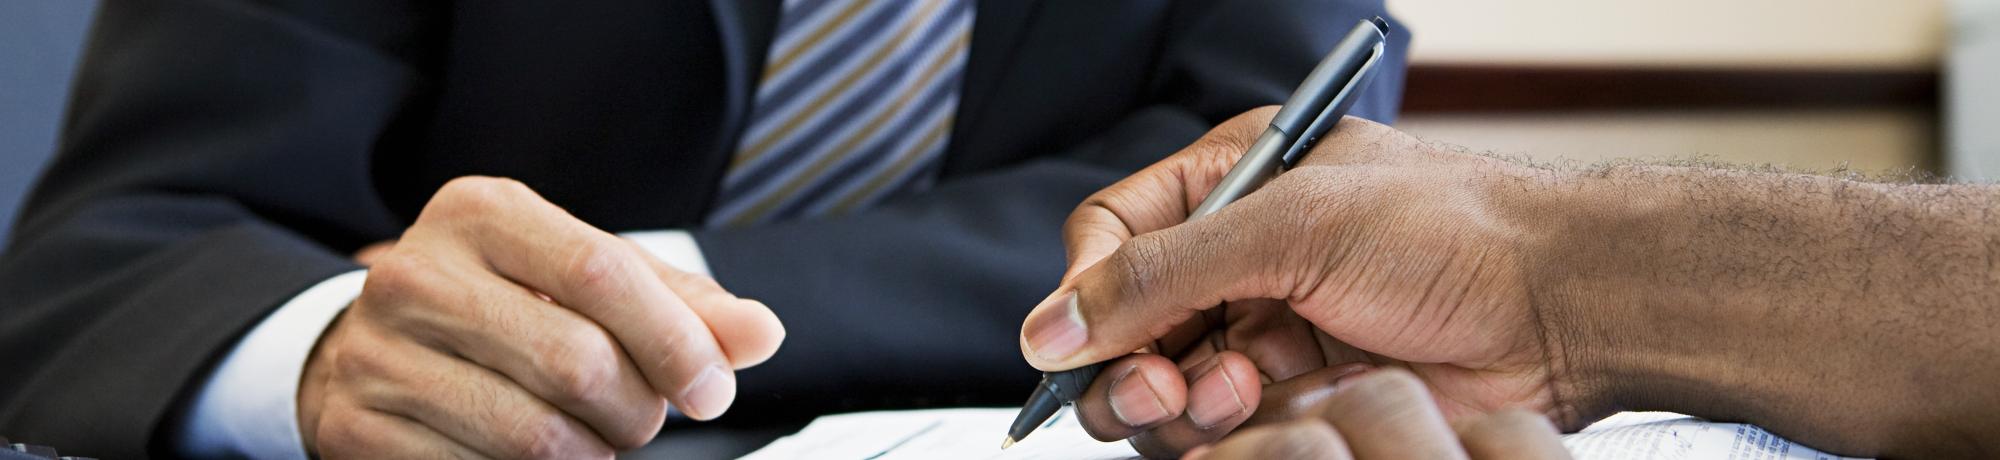 Close-up shot of a pair of hands signing what looks to be an official document., while someone in a suit looks on.